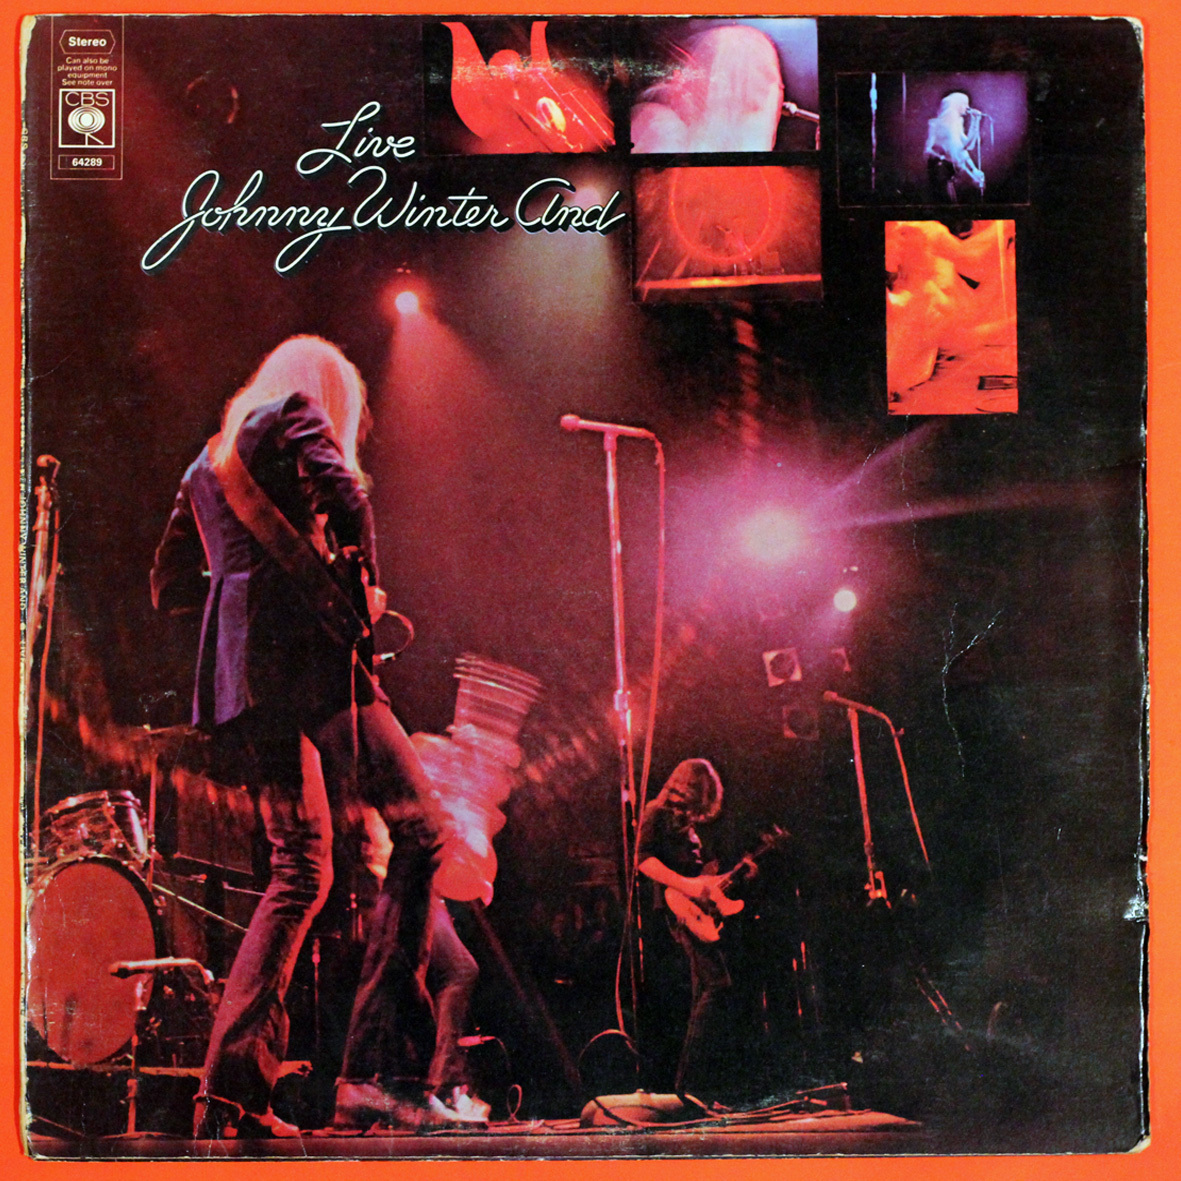 ◆LP◆ジョニー・ウィンター「Live Johnny Winter And」CBS S 64289、英国盤、ユニパック見開きジャケ「A1/B1」Blues Rock, Electric Bluesの画像1